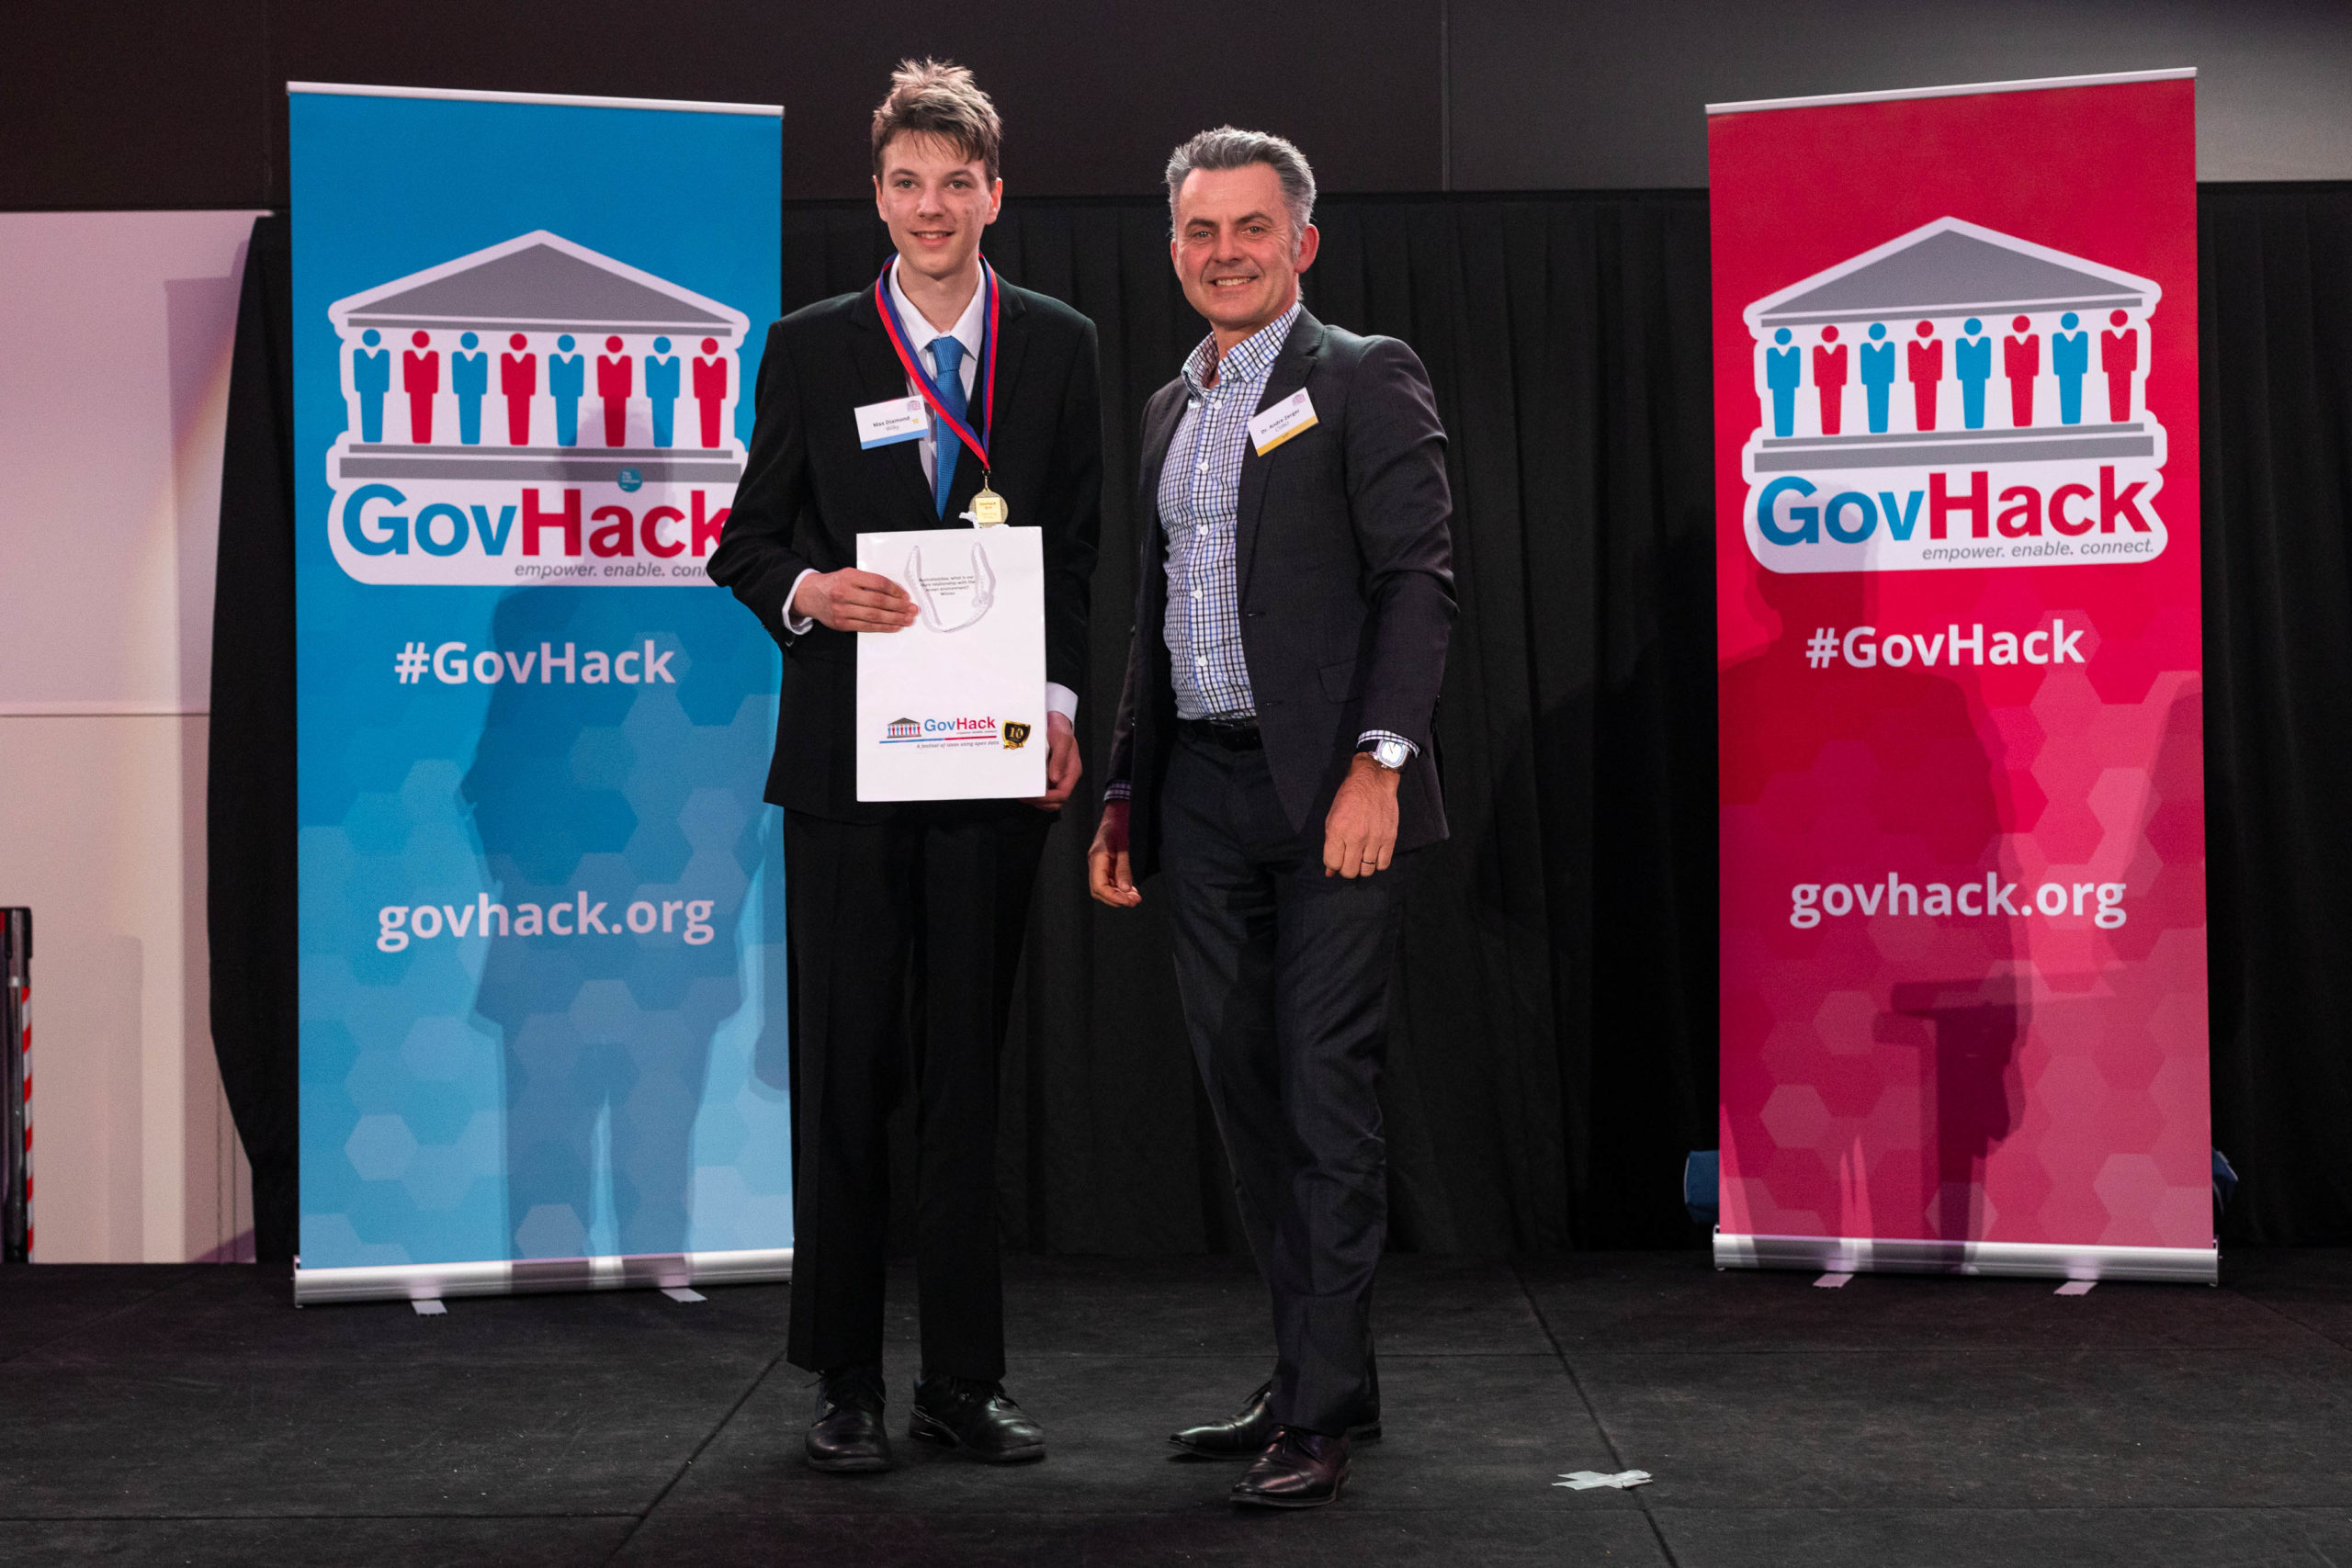 GovHack award winner holds a GovHack bag and is standing next to Director of the Atlas of Living Australia with GovHack banners in the background